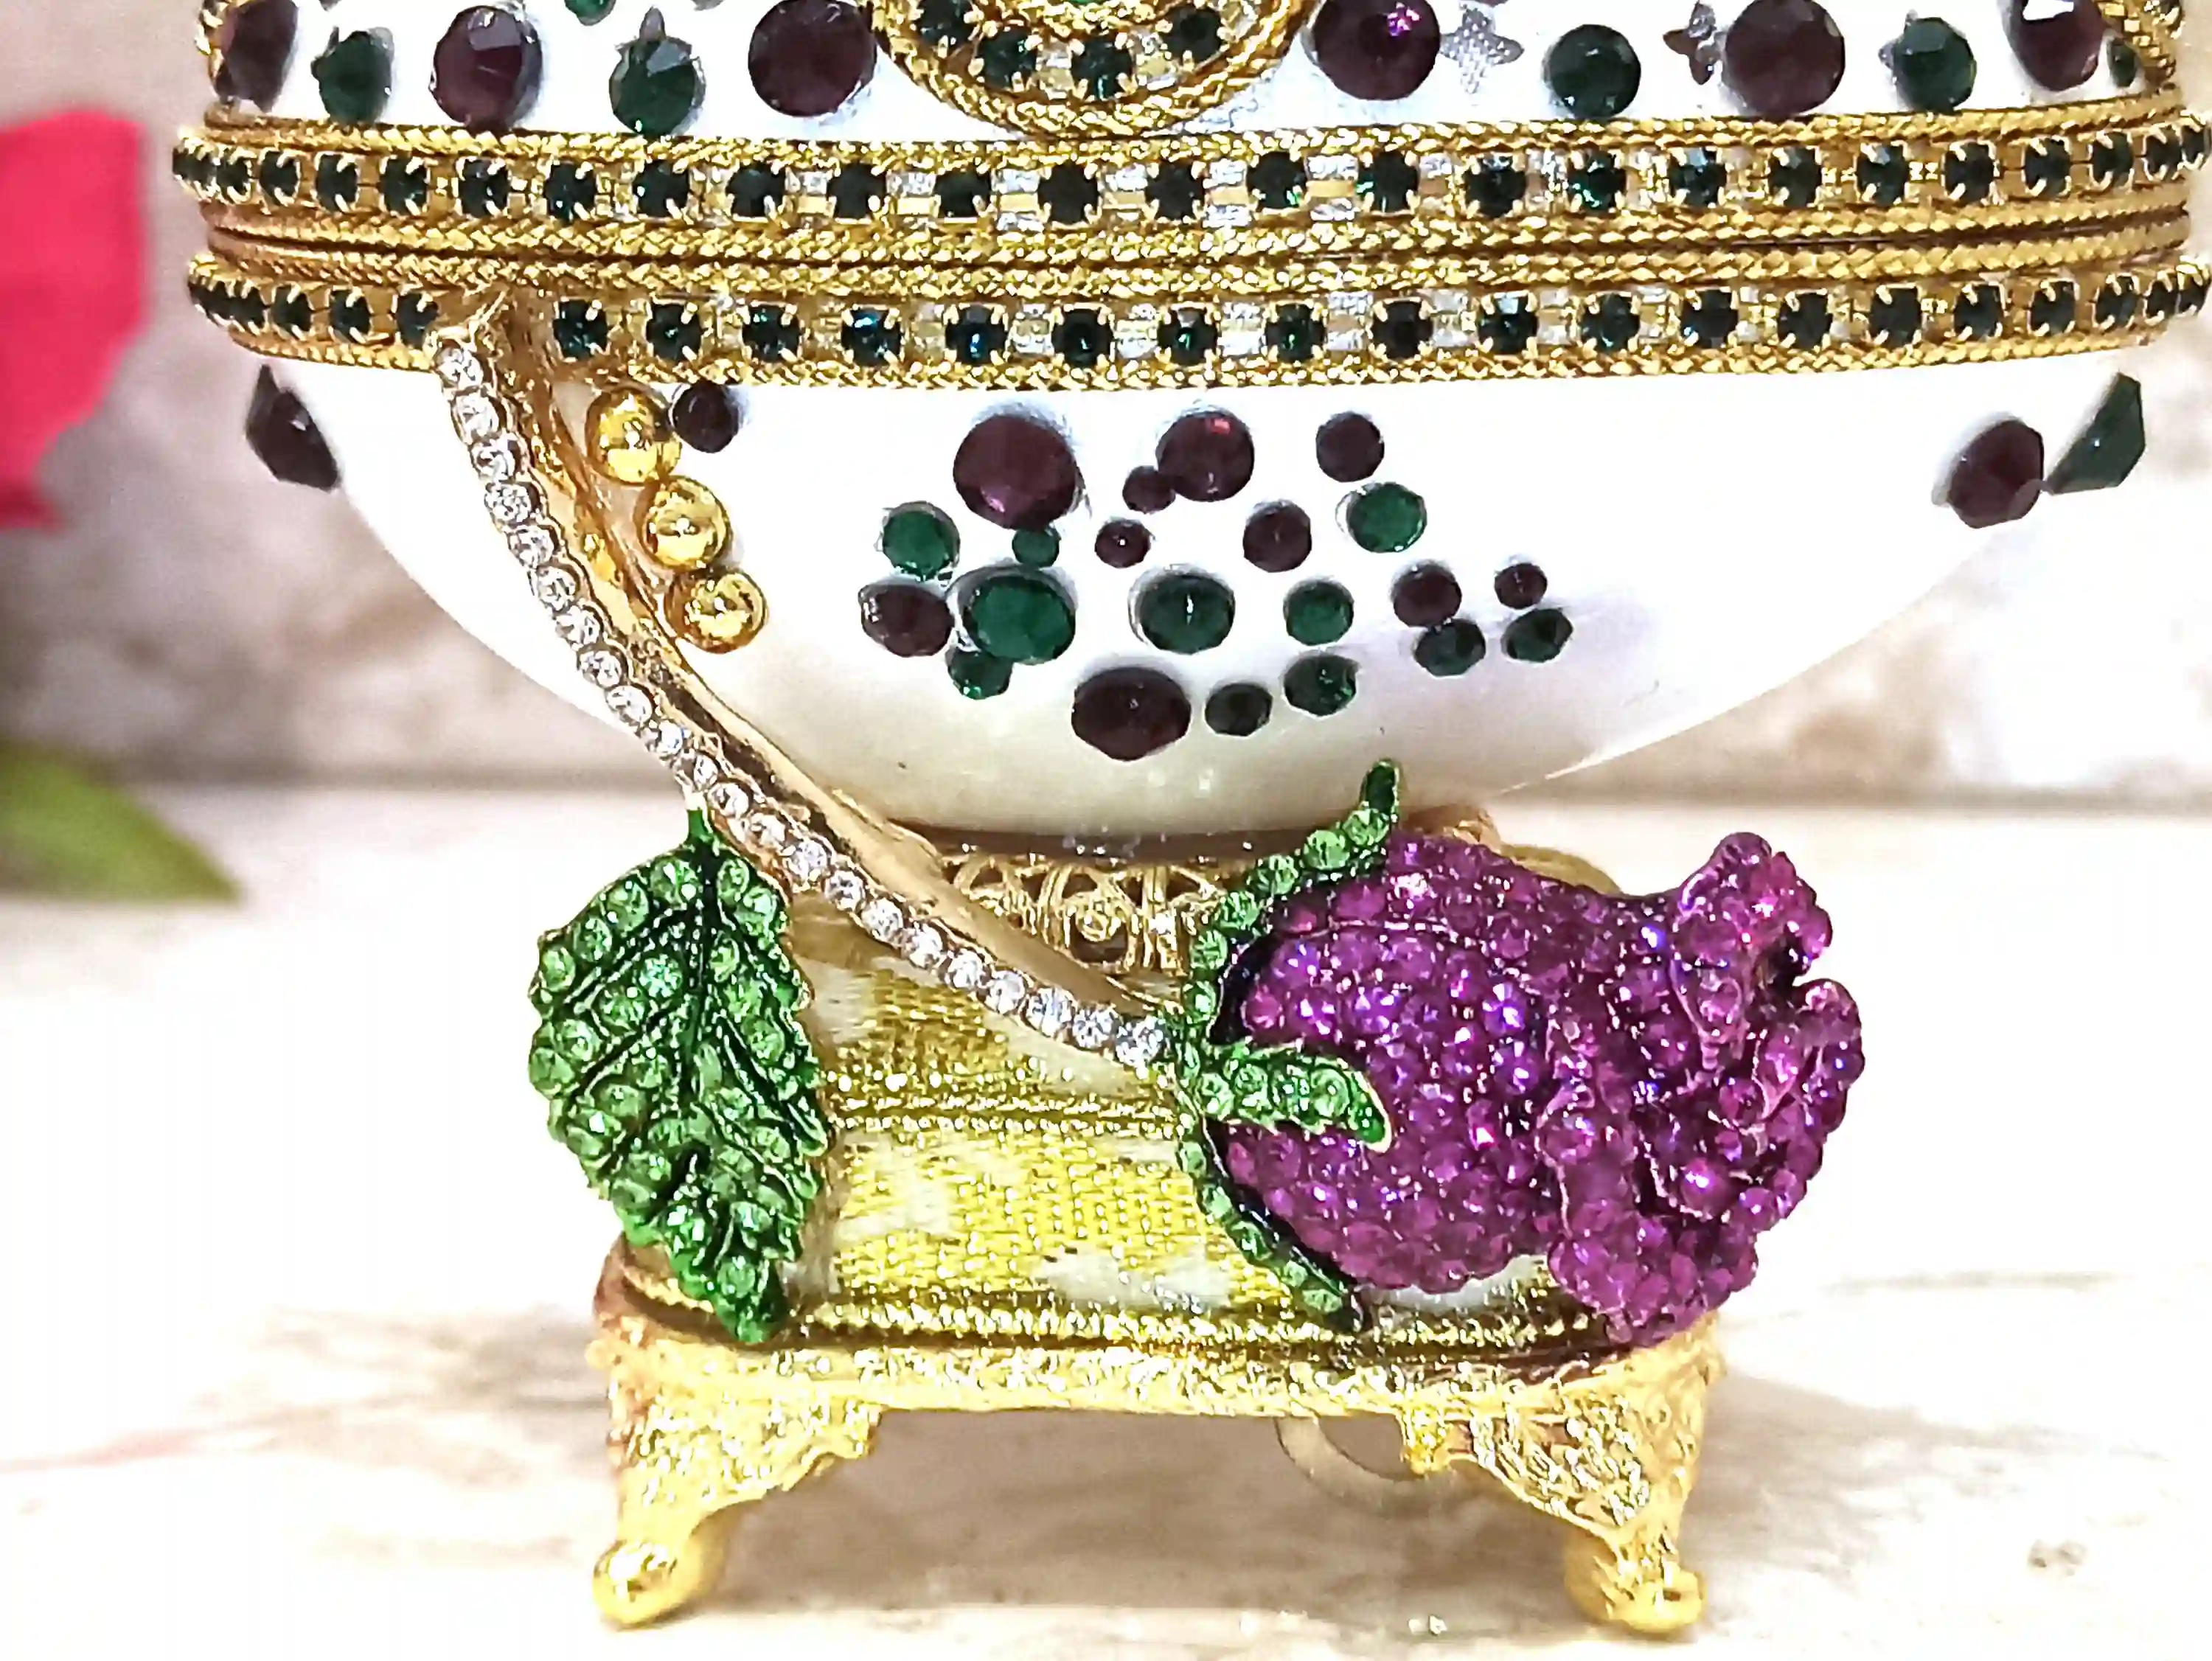 One Of a Kind, Faberge Egg style Jewelry Box SET, Amethyst, Fabrege Egg, Musical, Faberge Egg Box & Handmade Bracelet ,24k GOLD, HANDCARVED 